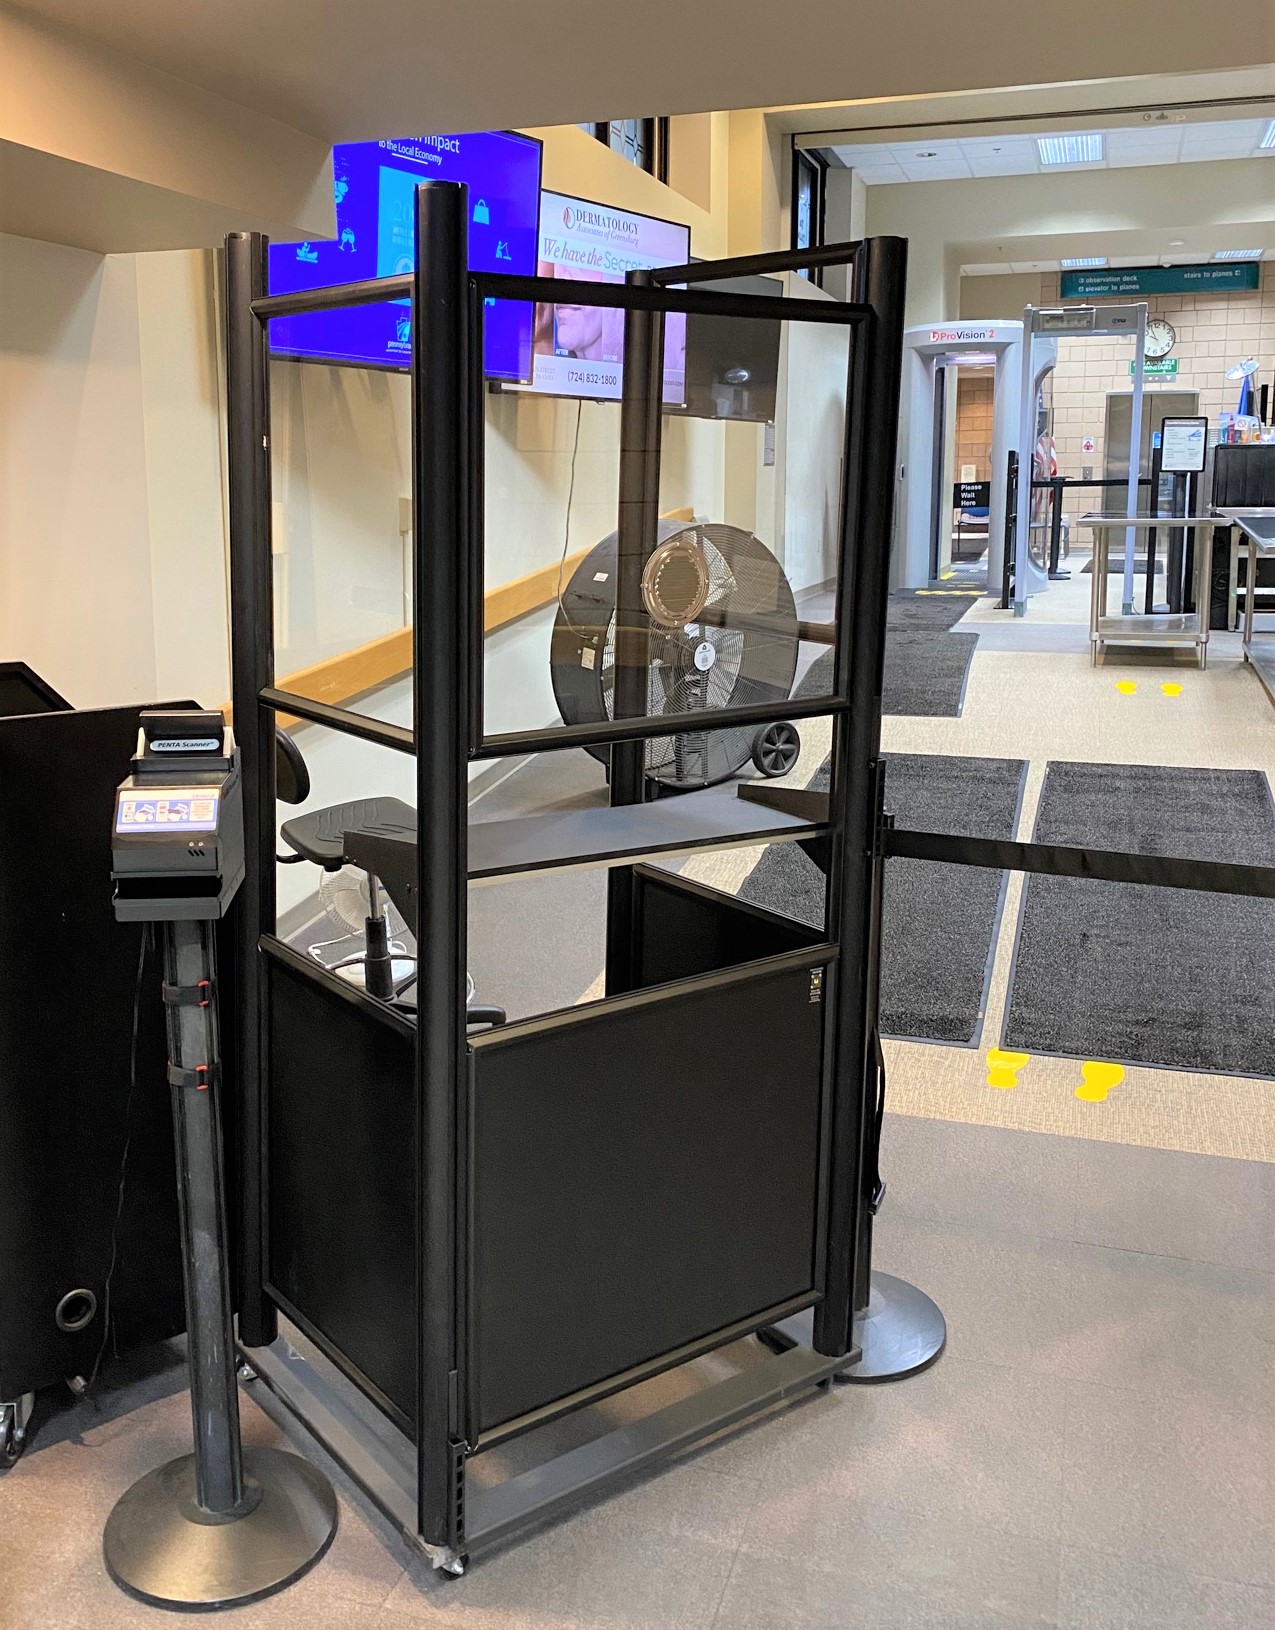 Tsa Has Installed New Acrylic Shields At Arnold Palmer Regional Airport To Help Protect